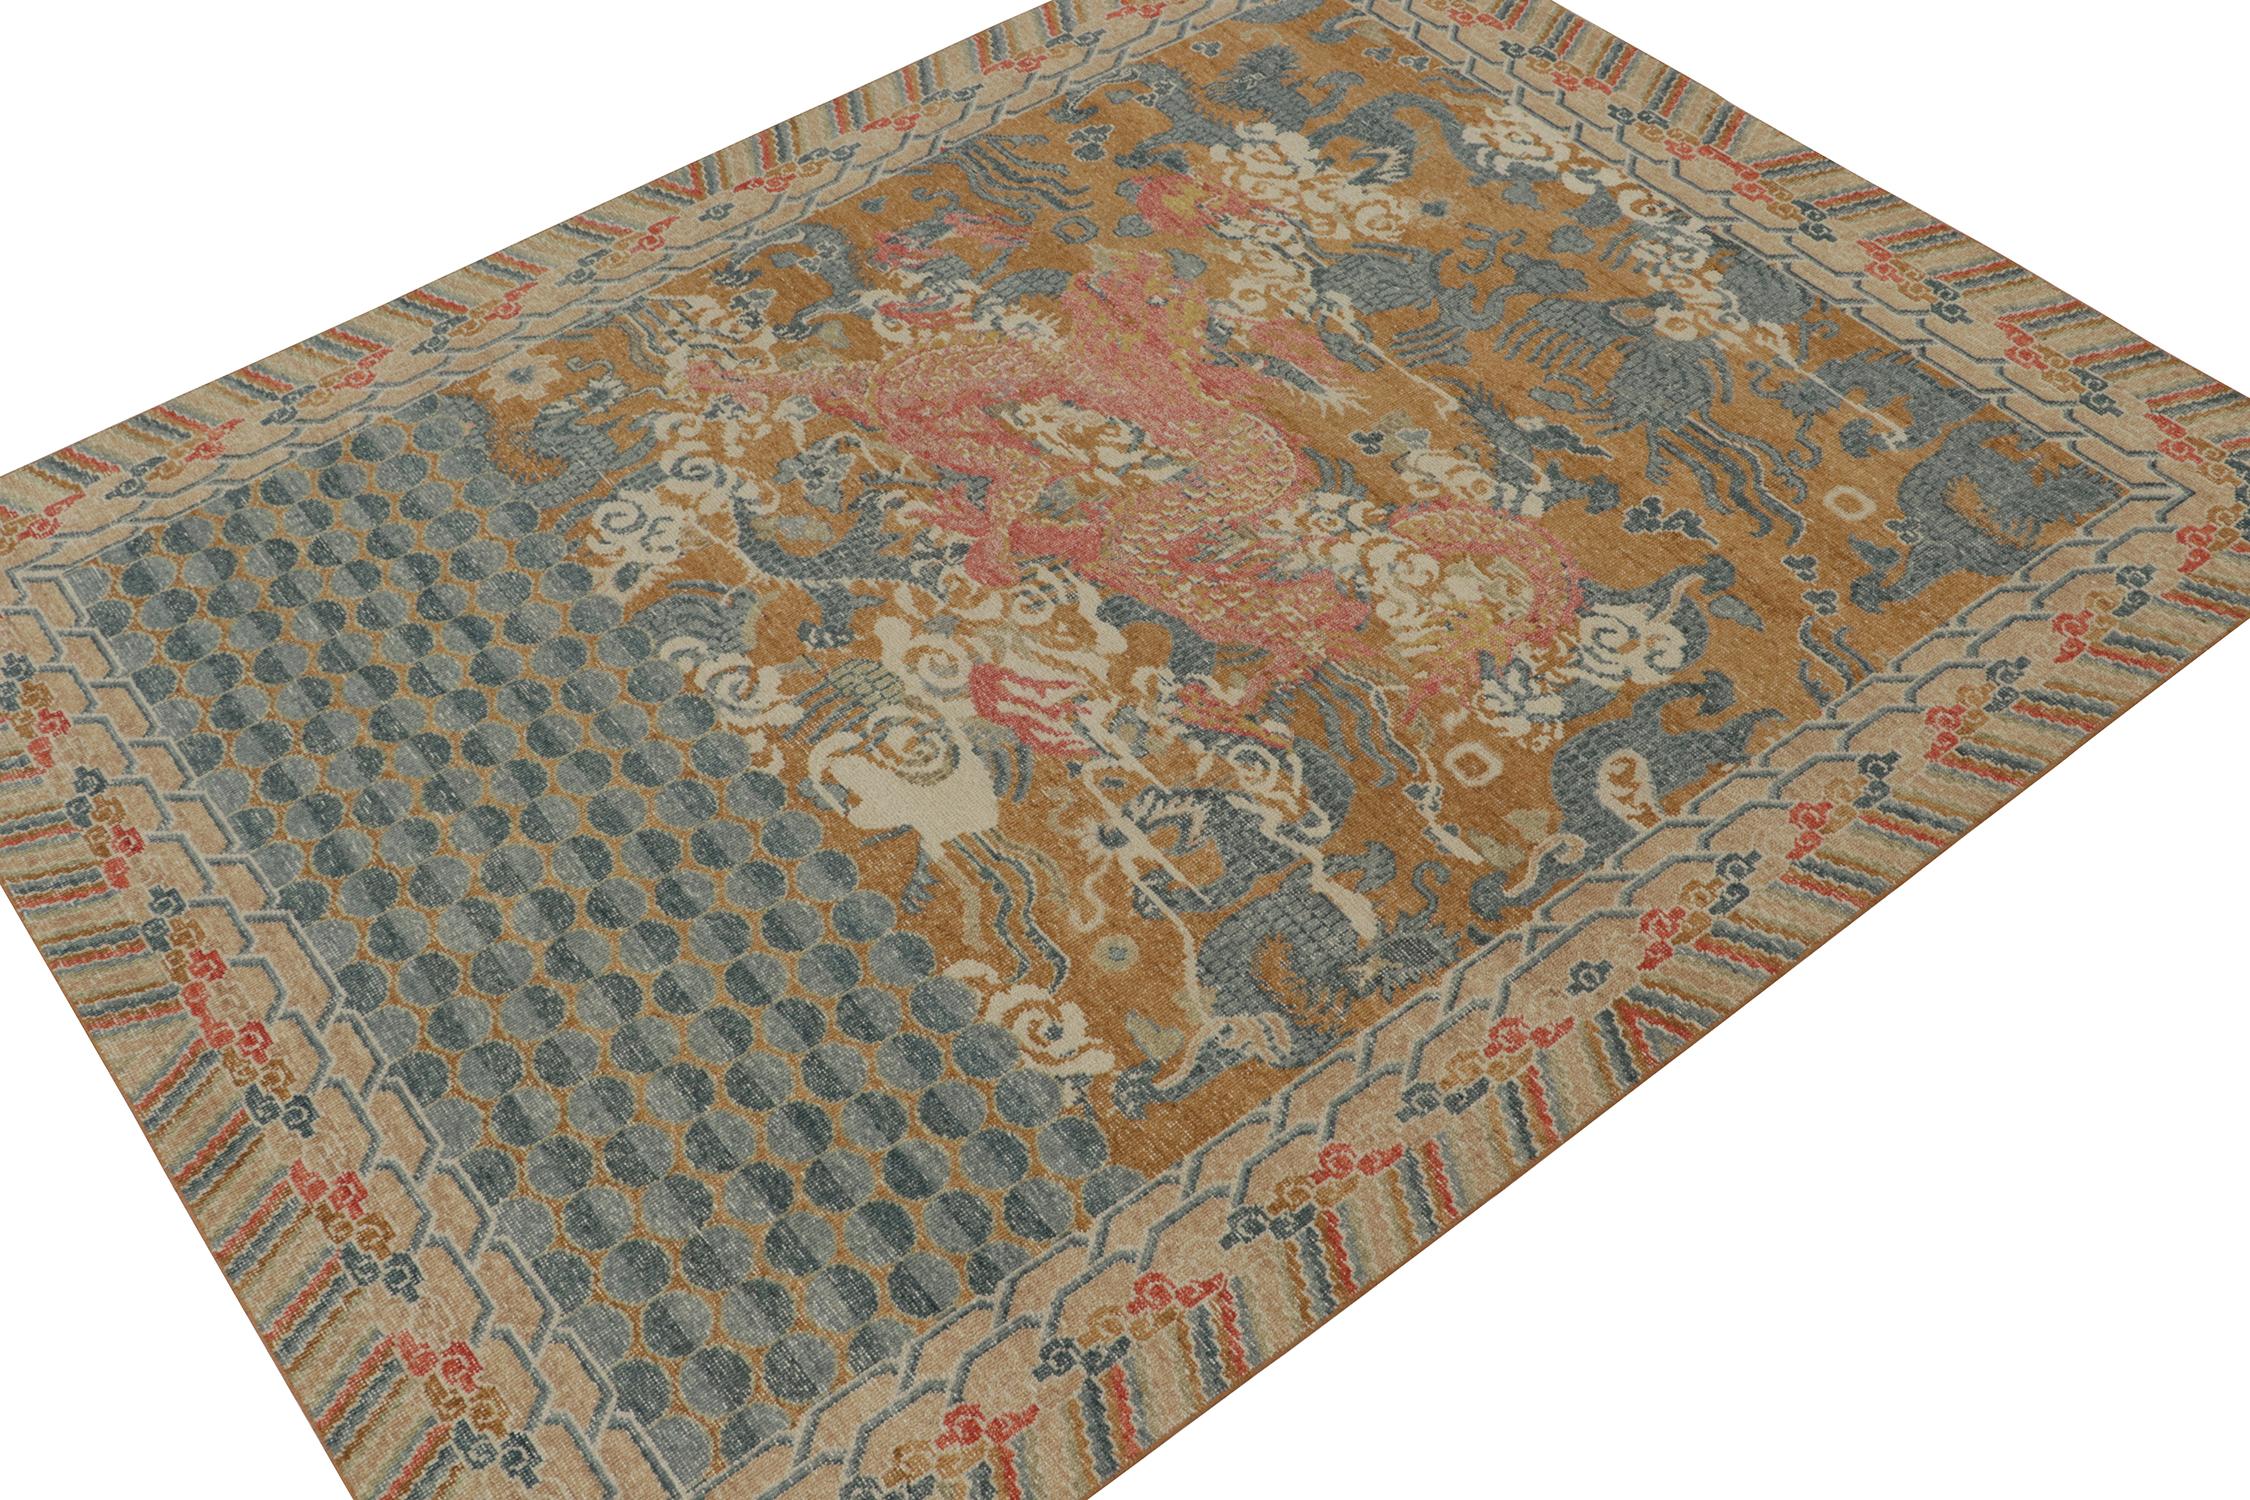 Indian Rug & Kilim’s Distressed Style Dragon Rug in Ochre, Blue and Red Pictorial For Sale